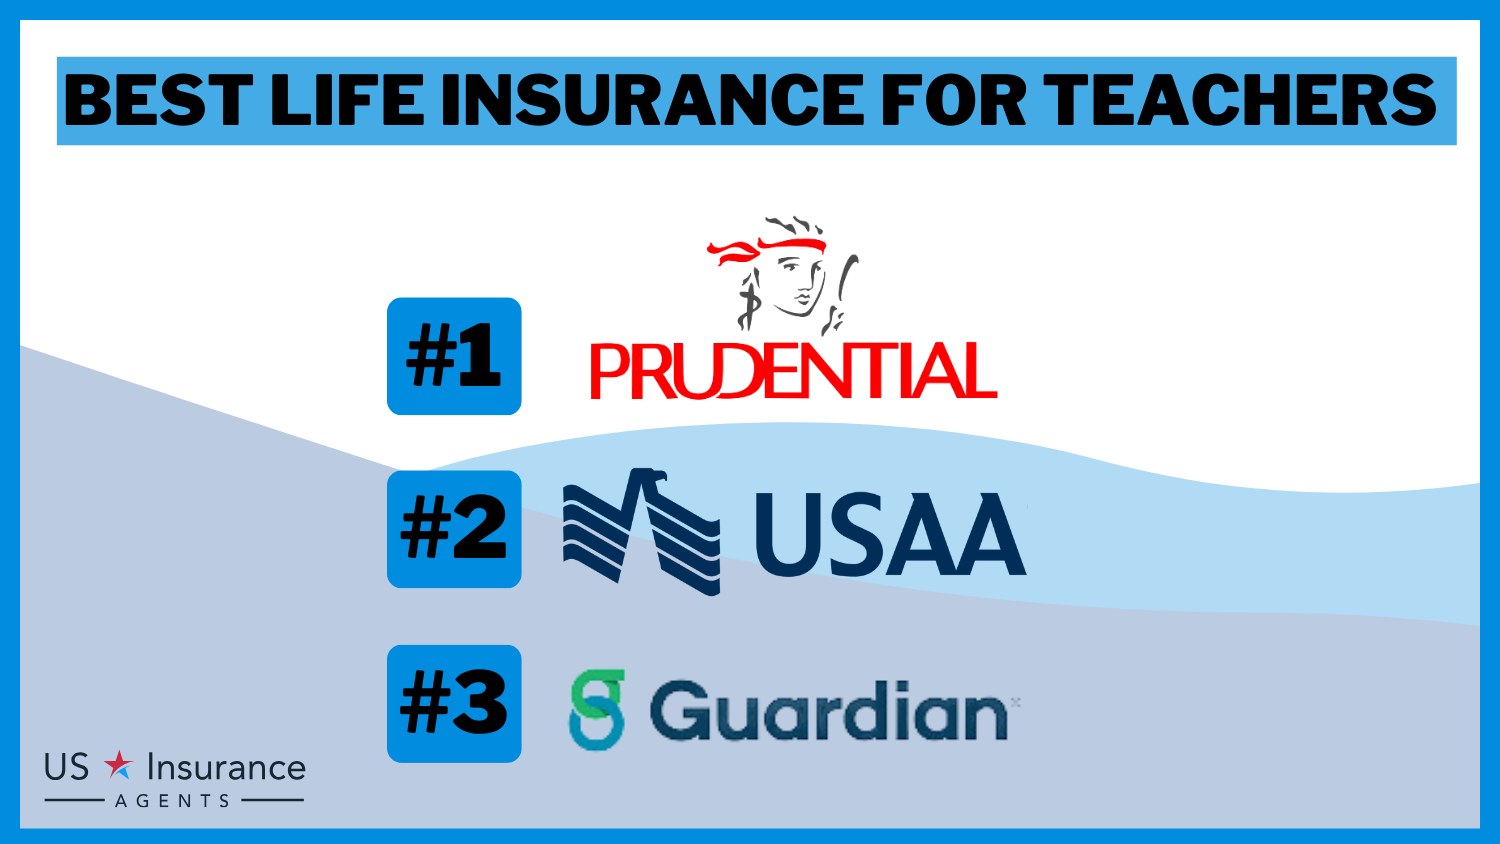 3 Best Life Insurance for Teachers: Prudential, USAA and Guardian